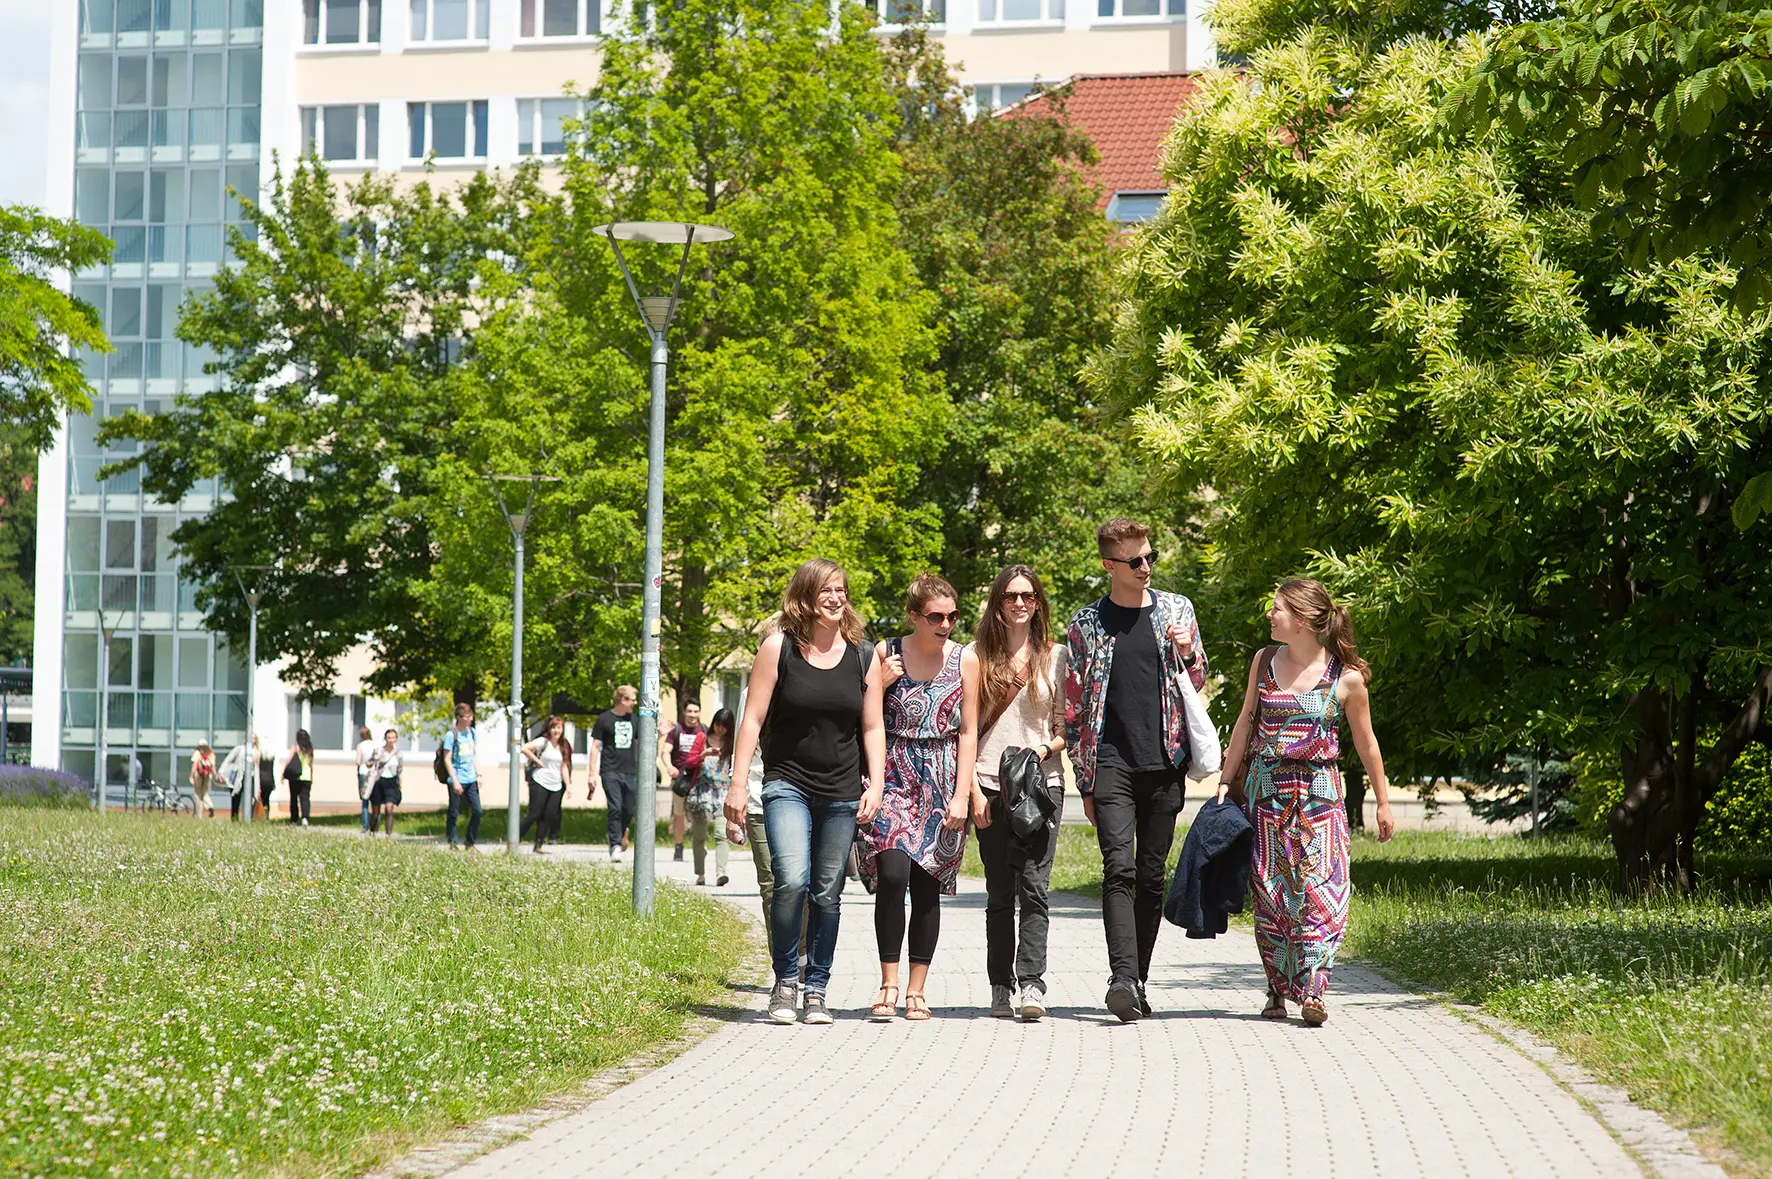 Students on the campus of the University of Erfurt